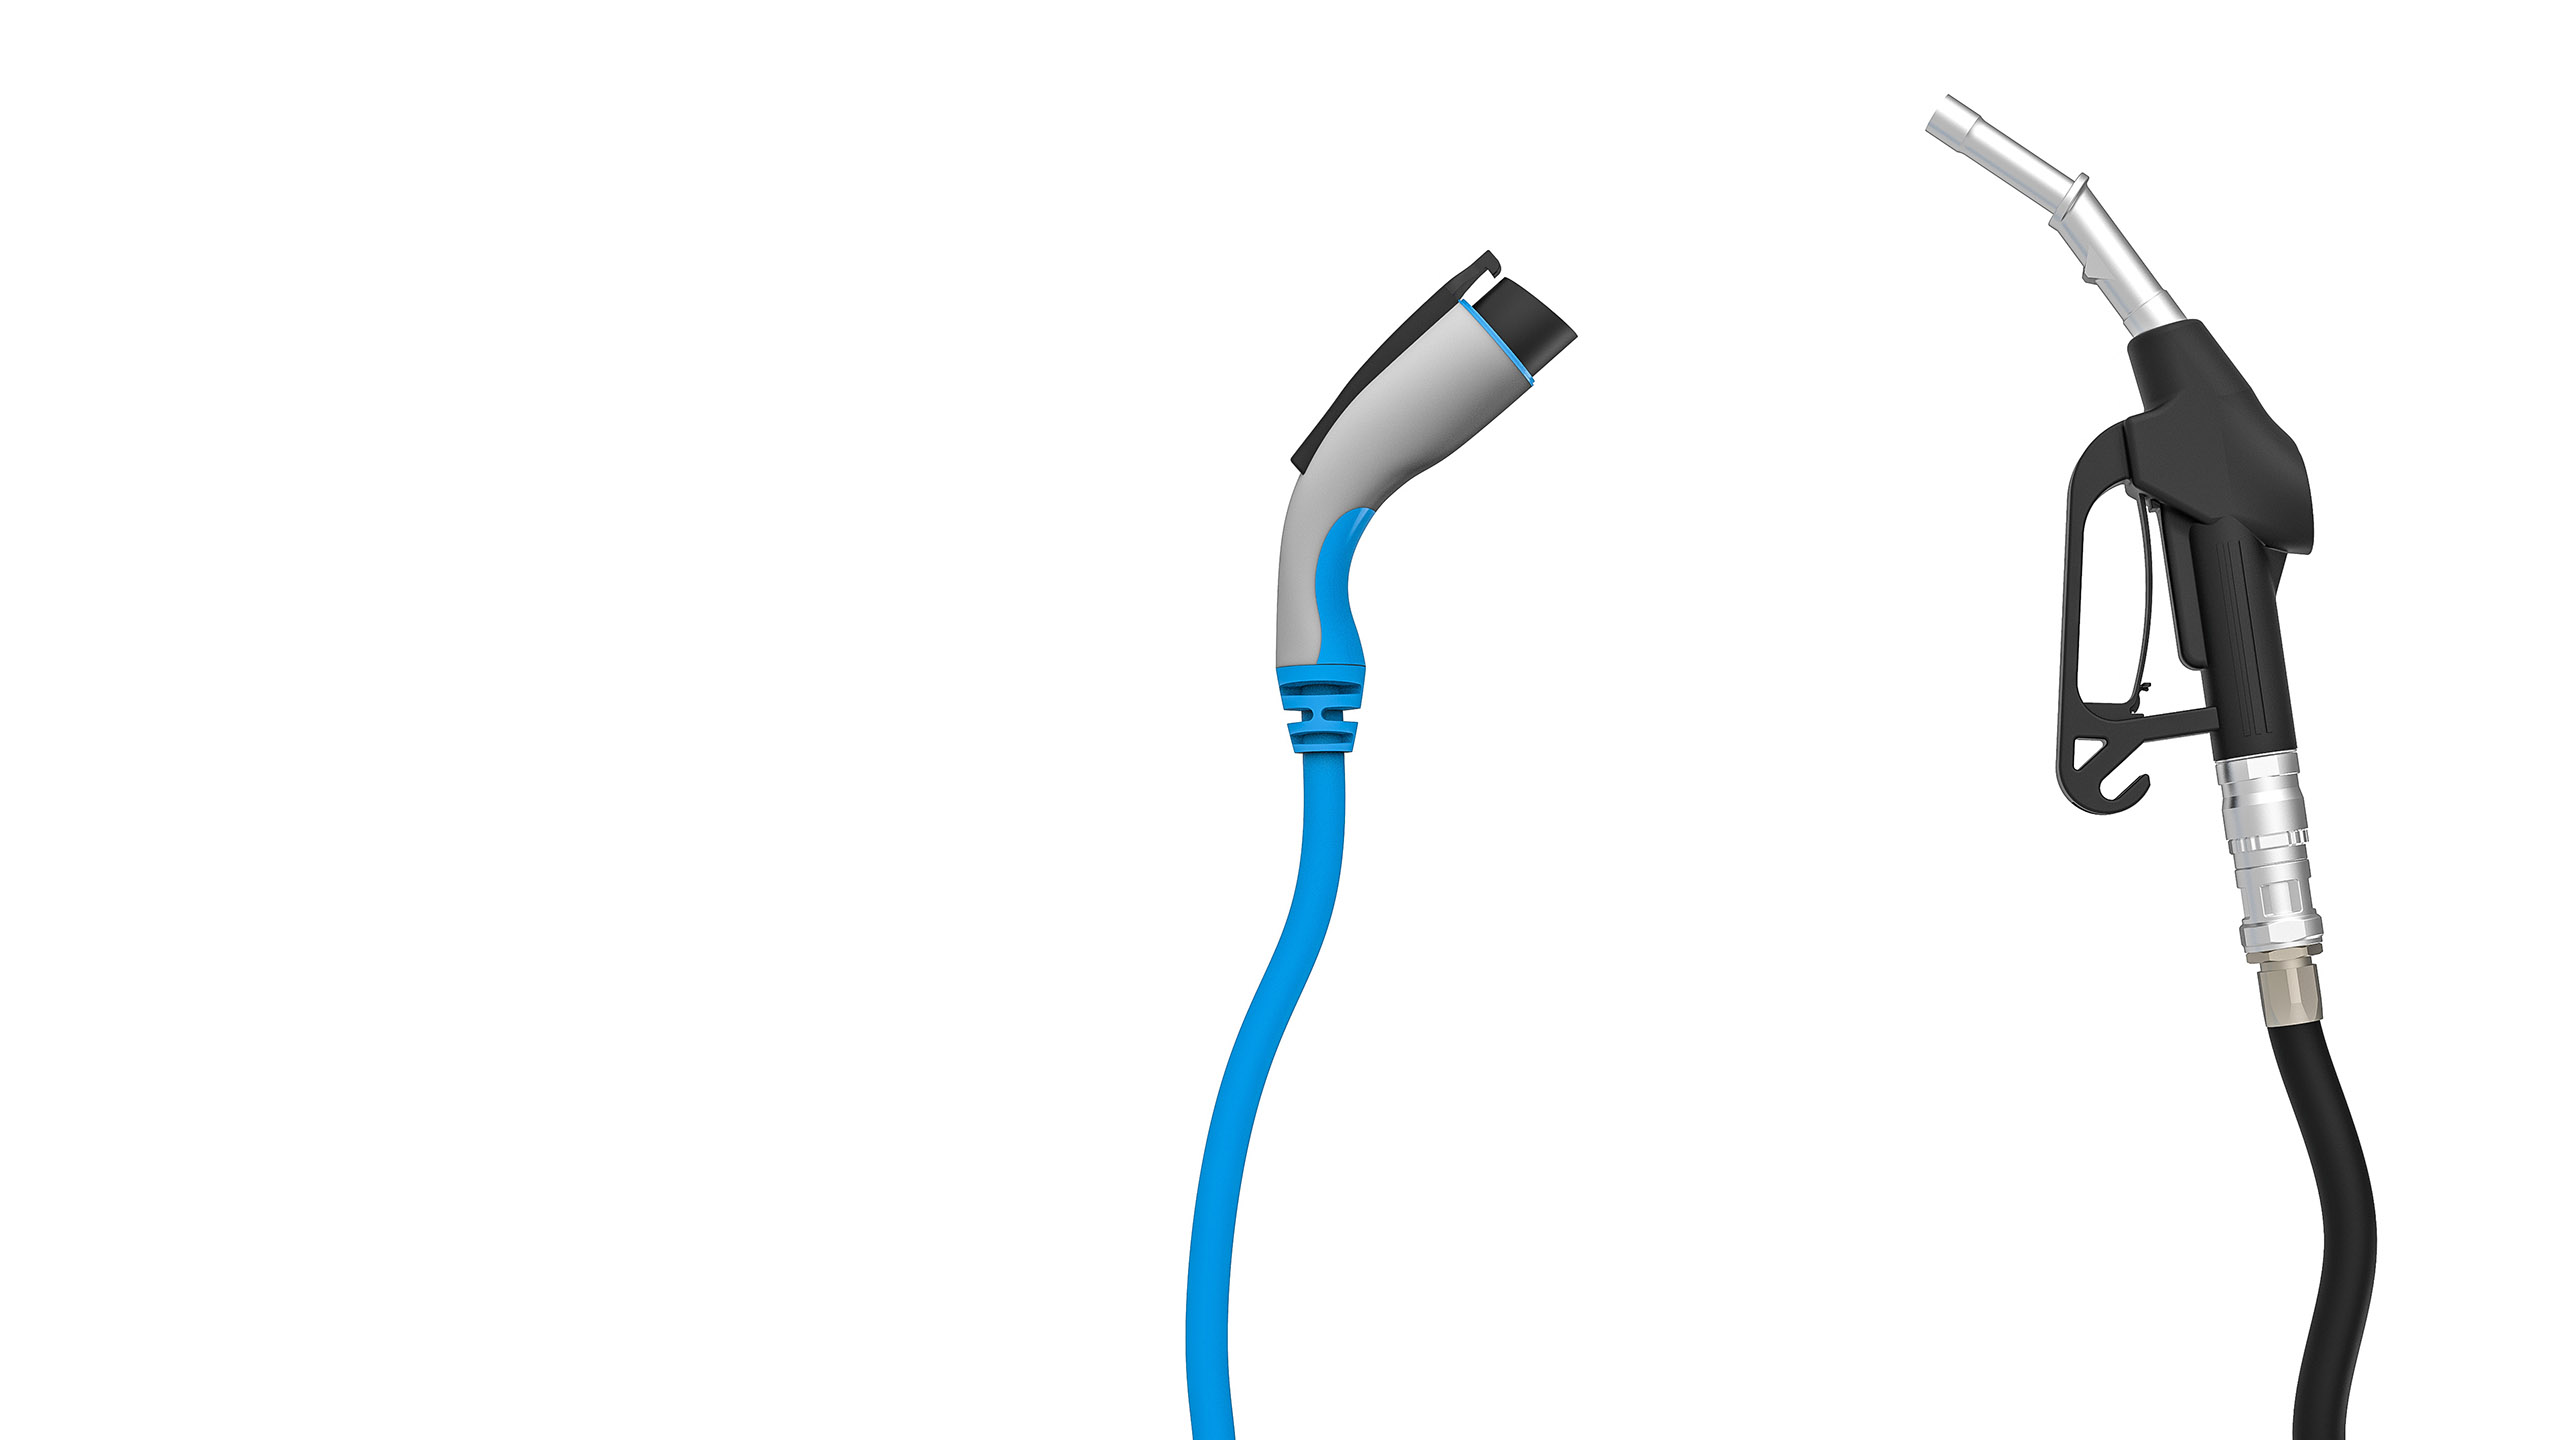 electric recharging cable for vehicles and a gas pump nozzle on a white background